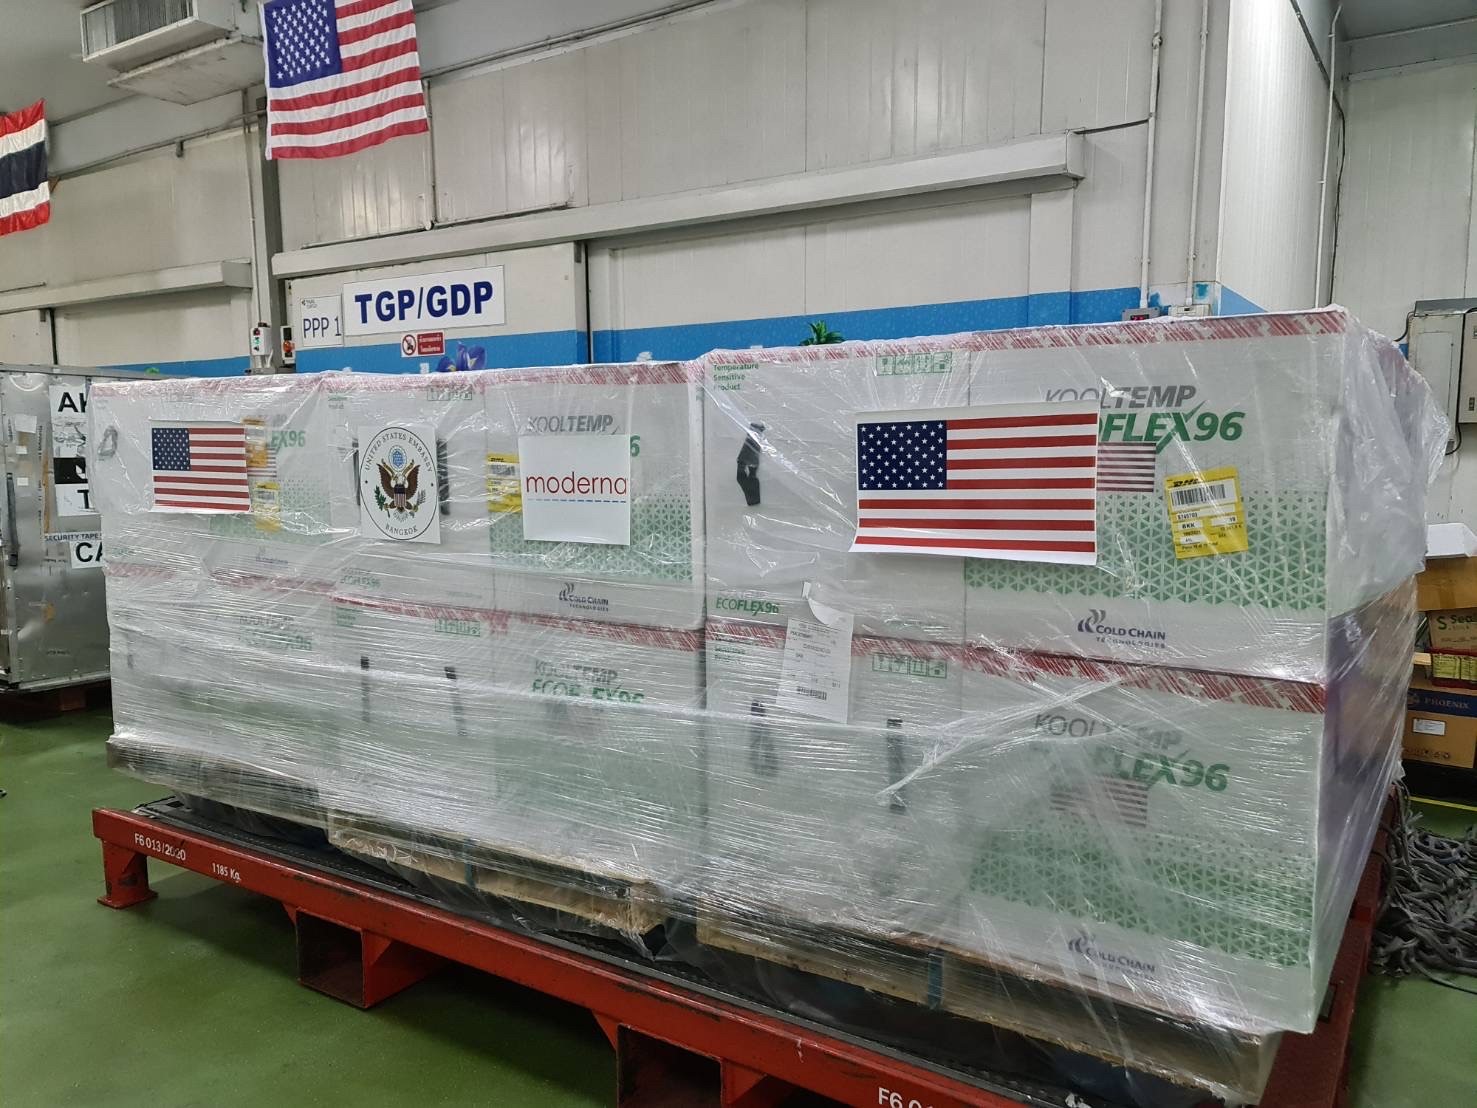 Zuellig Pharma brings logistics expertise to support the Thai government in distribution of one million doses of COVID -19 vaccine Moderna donated by the US government for Thai people